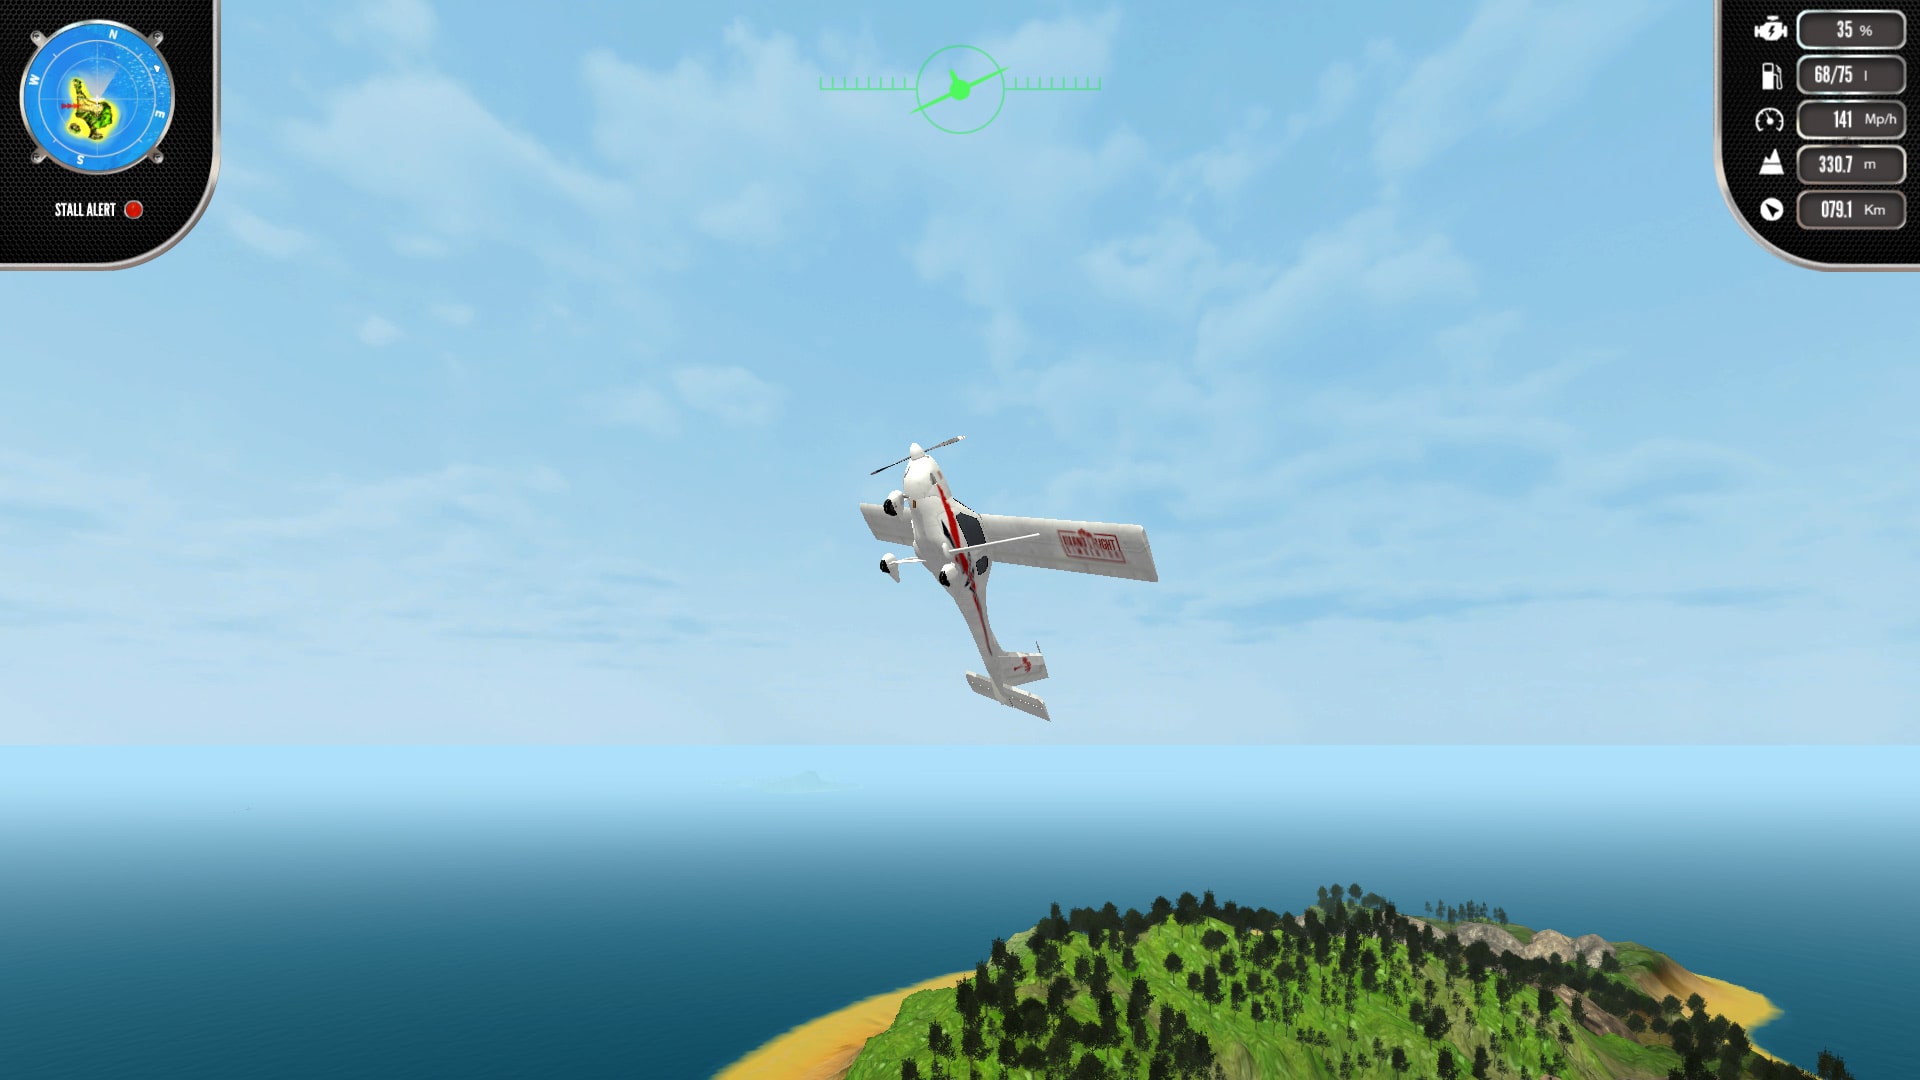 Buy Island Flight Simulator PS4 Game Code Compare Prices